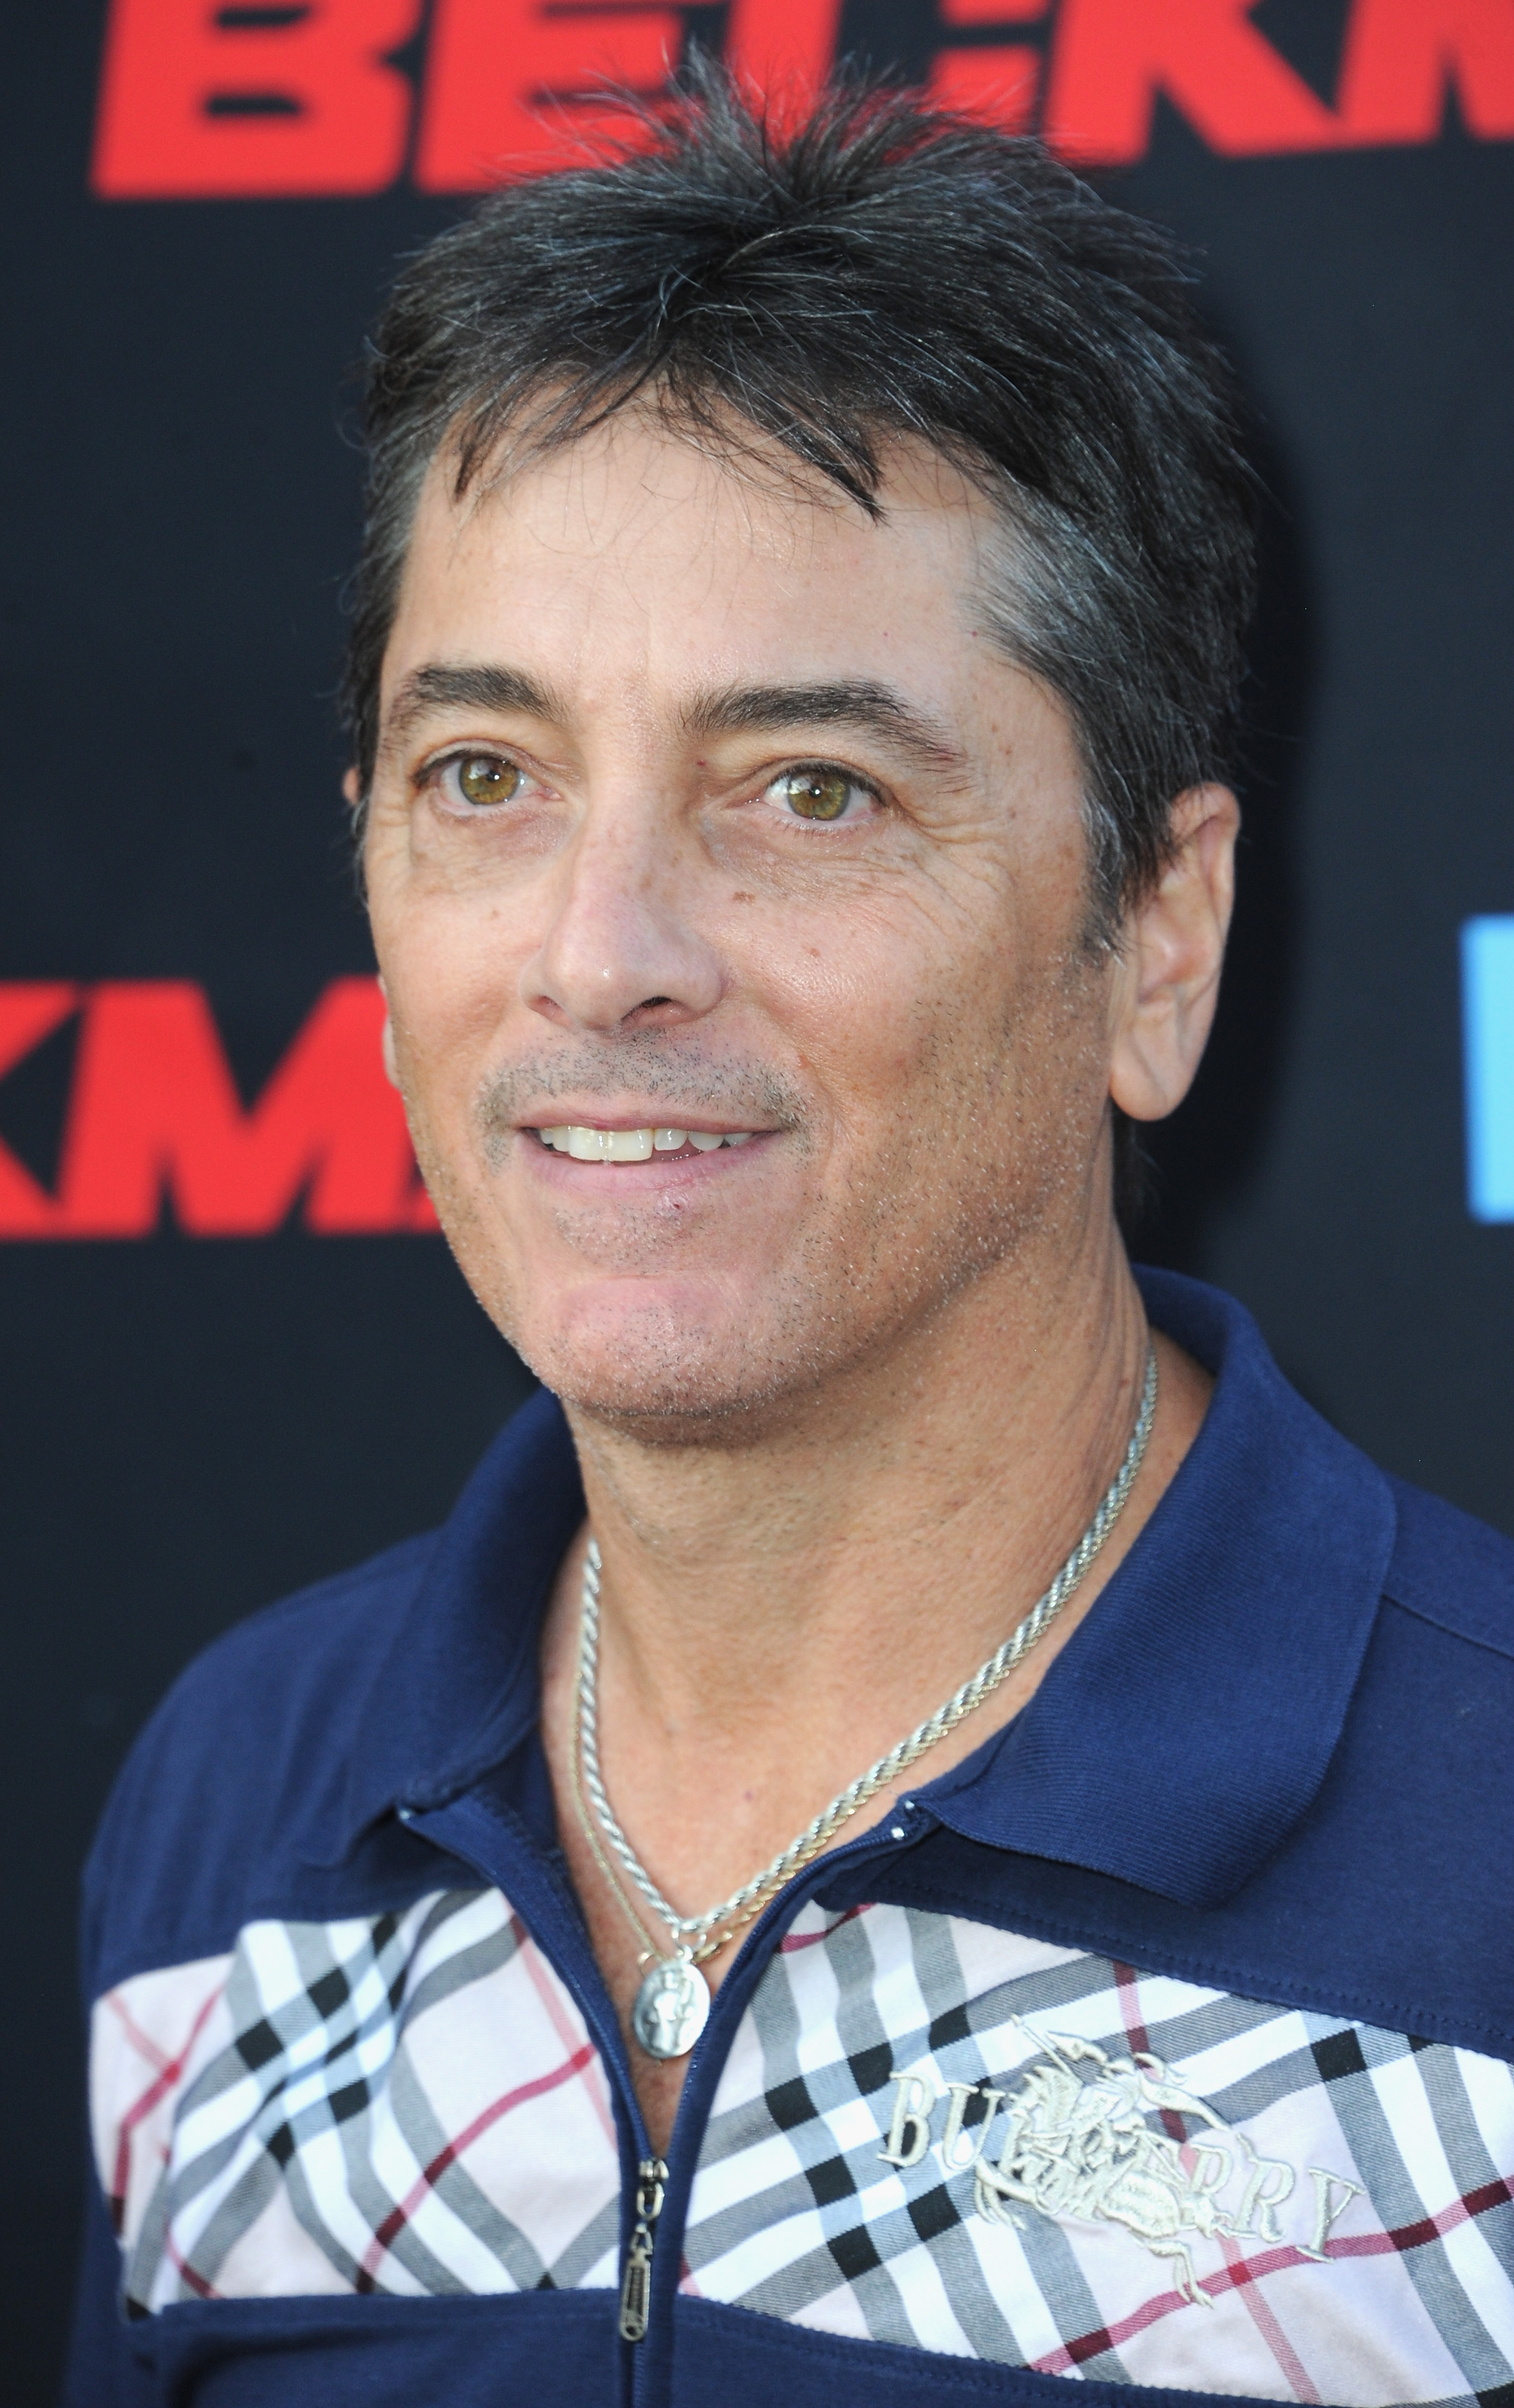 Scott Baio arrives for the premiere of "Beckman" held at Hilton Los Angeles/Universal City on September 21, 2020 in Universal City, California | Source: Getty Images